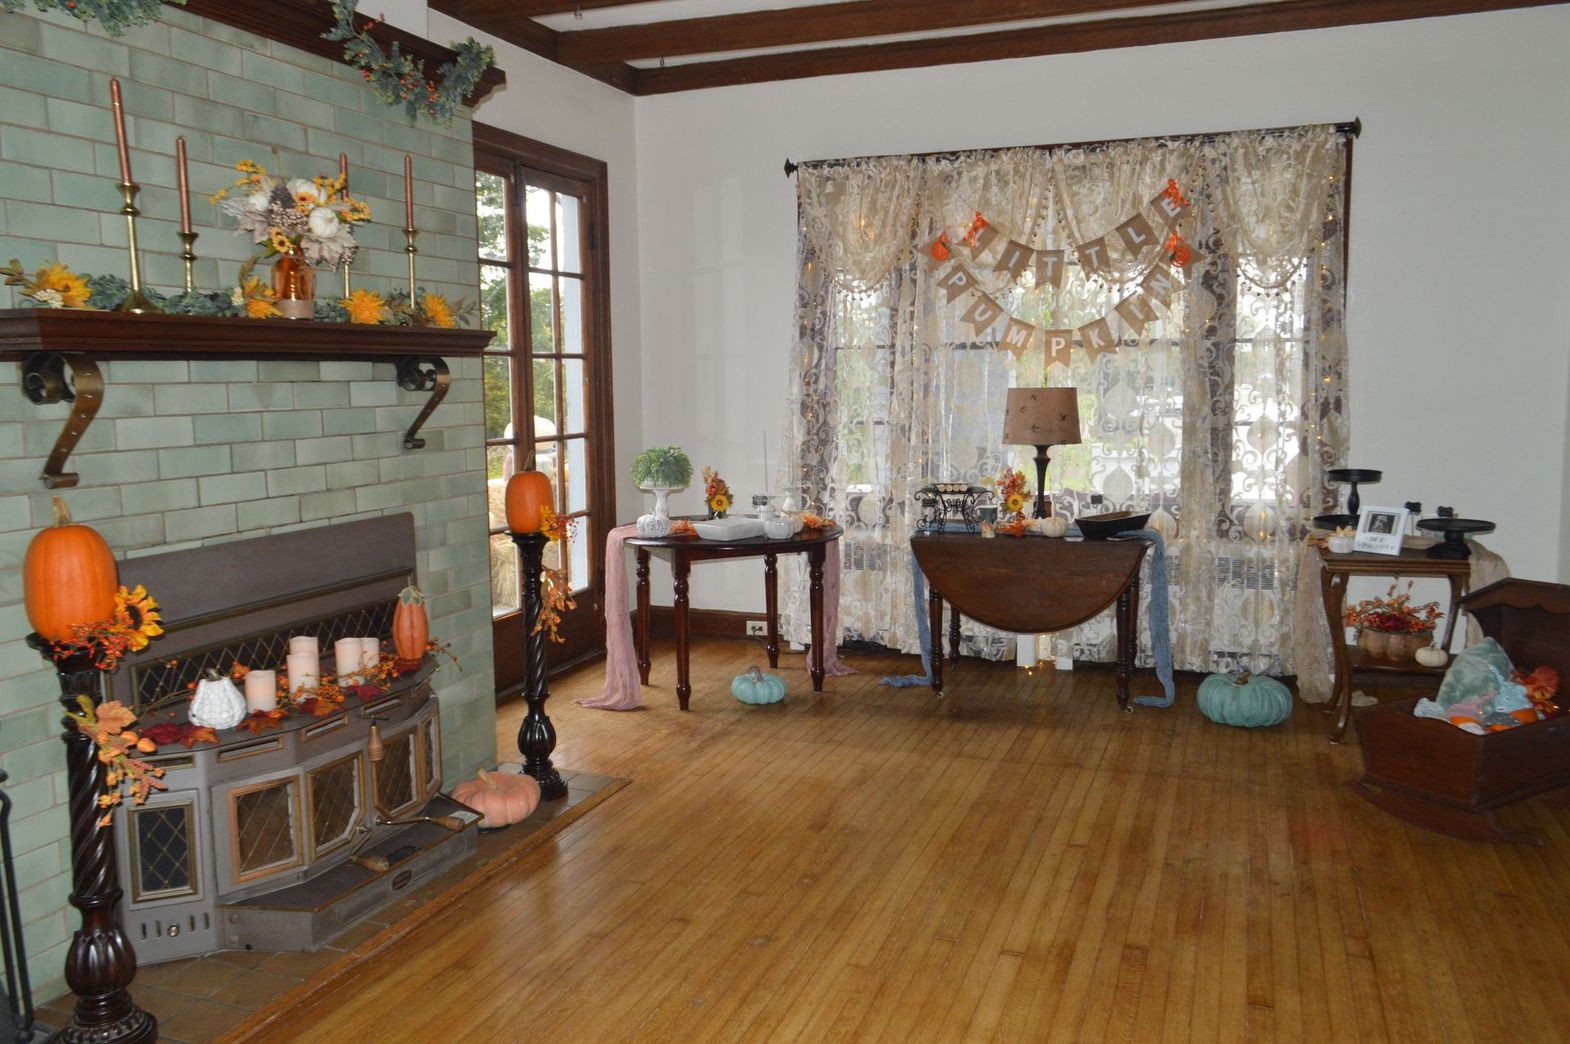 a living room decorated for fall with pumpkins candles and a banner that says happy halloween